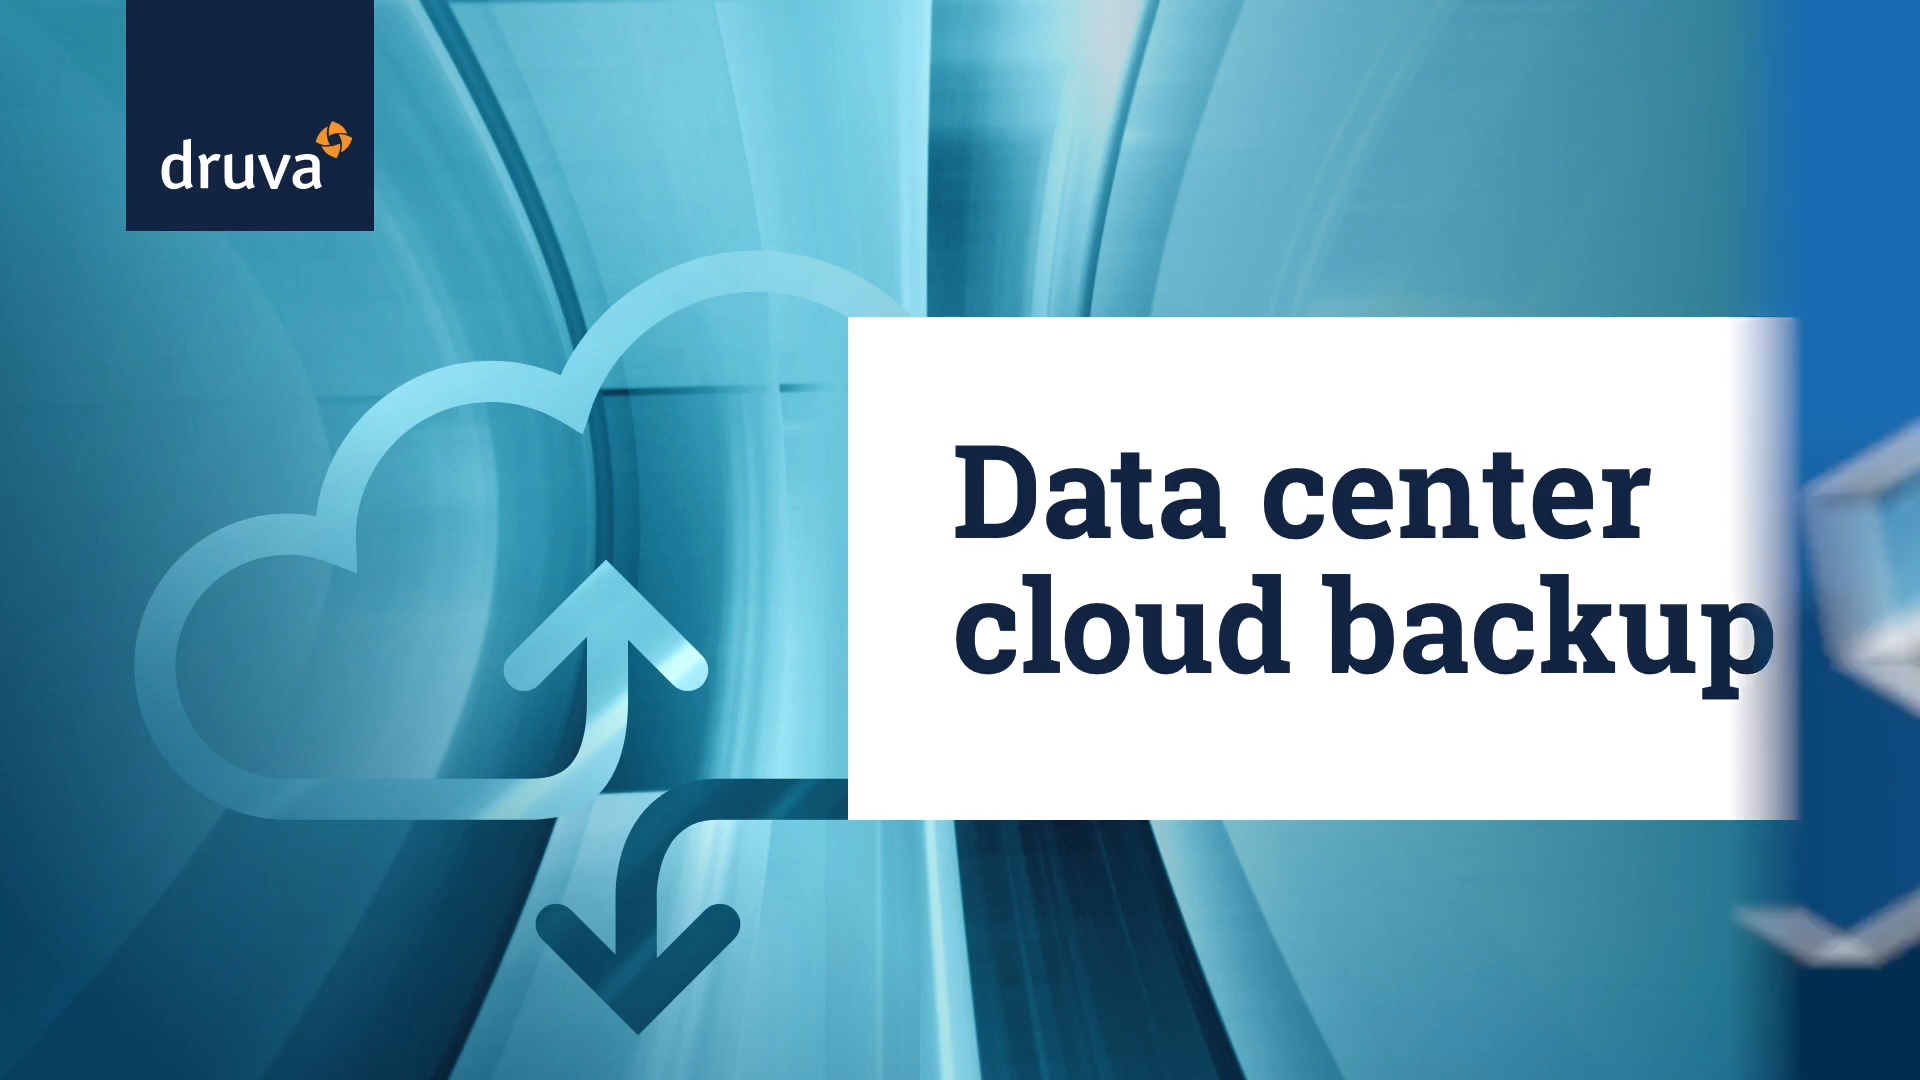 Product demo: Data center cloud backup and disaster recovery